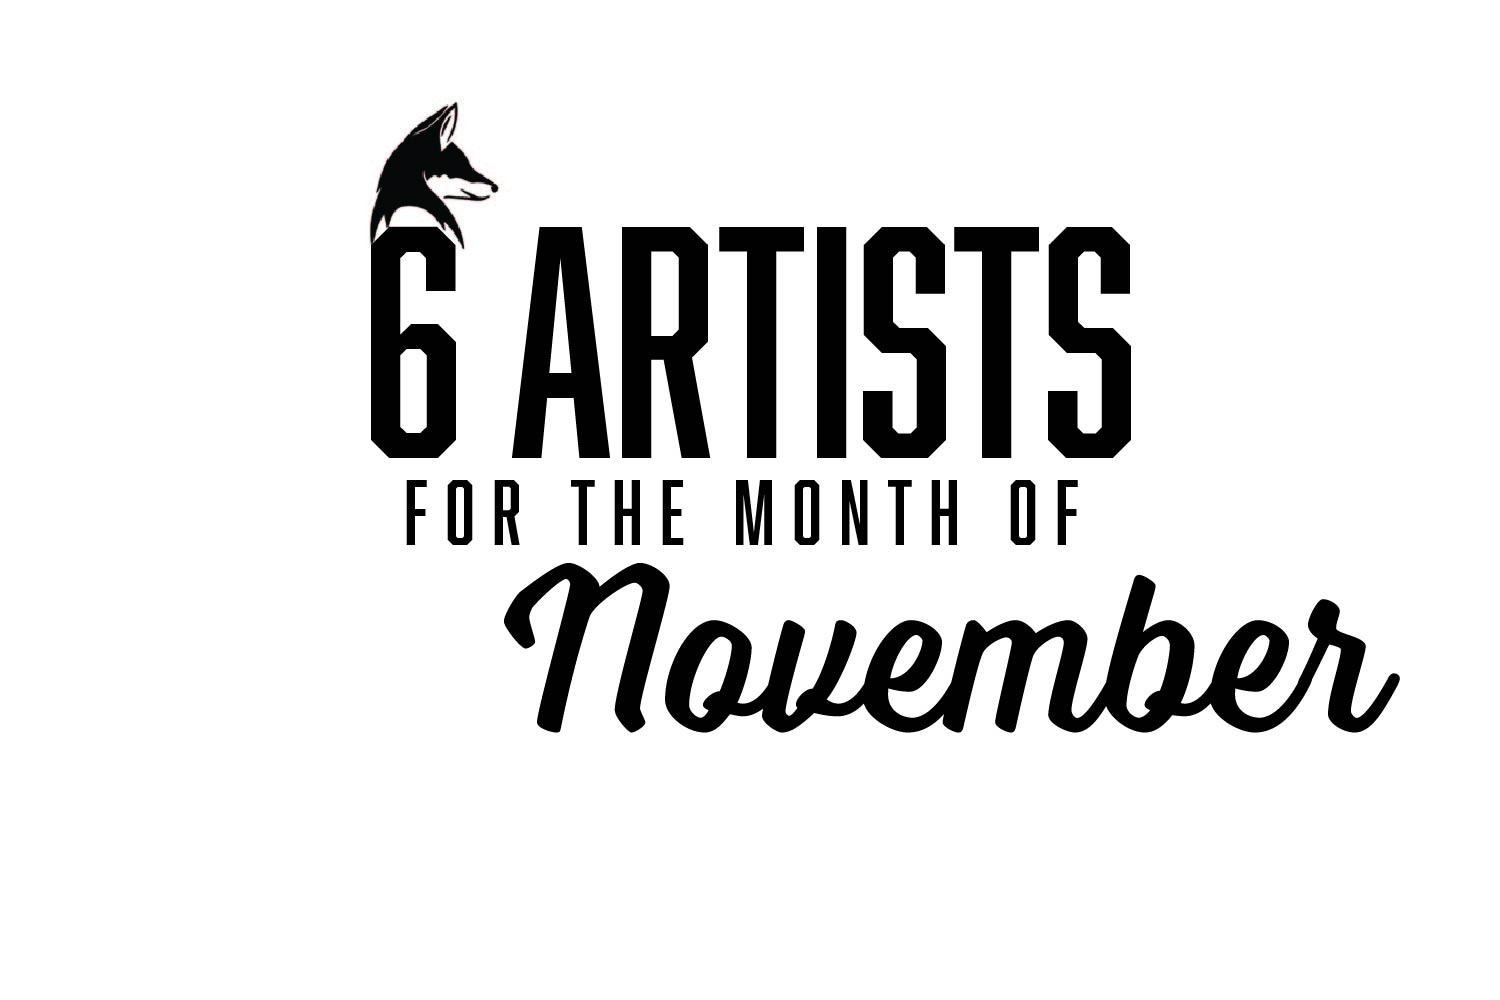 Six Artists You Should Be Listening To: November 2020 EDITION